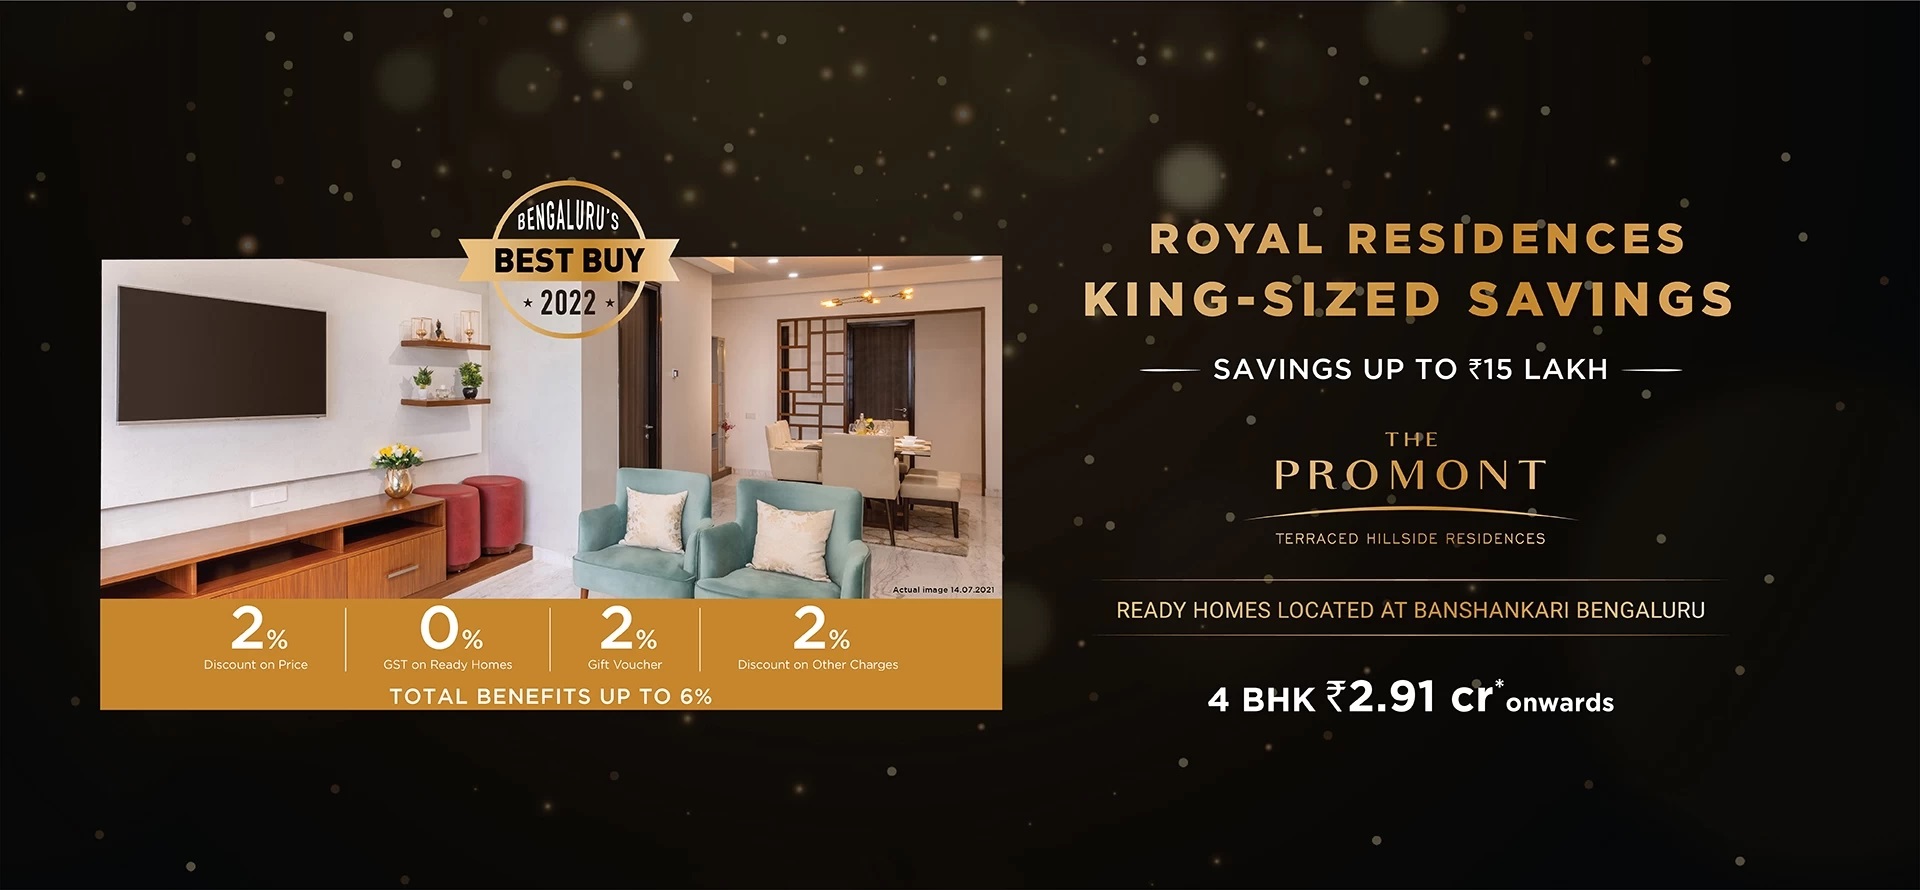 Royal residences king-sized savings up to Rs 15 Lac at Tata The Promont in Bangalore